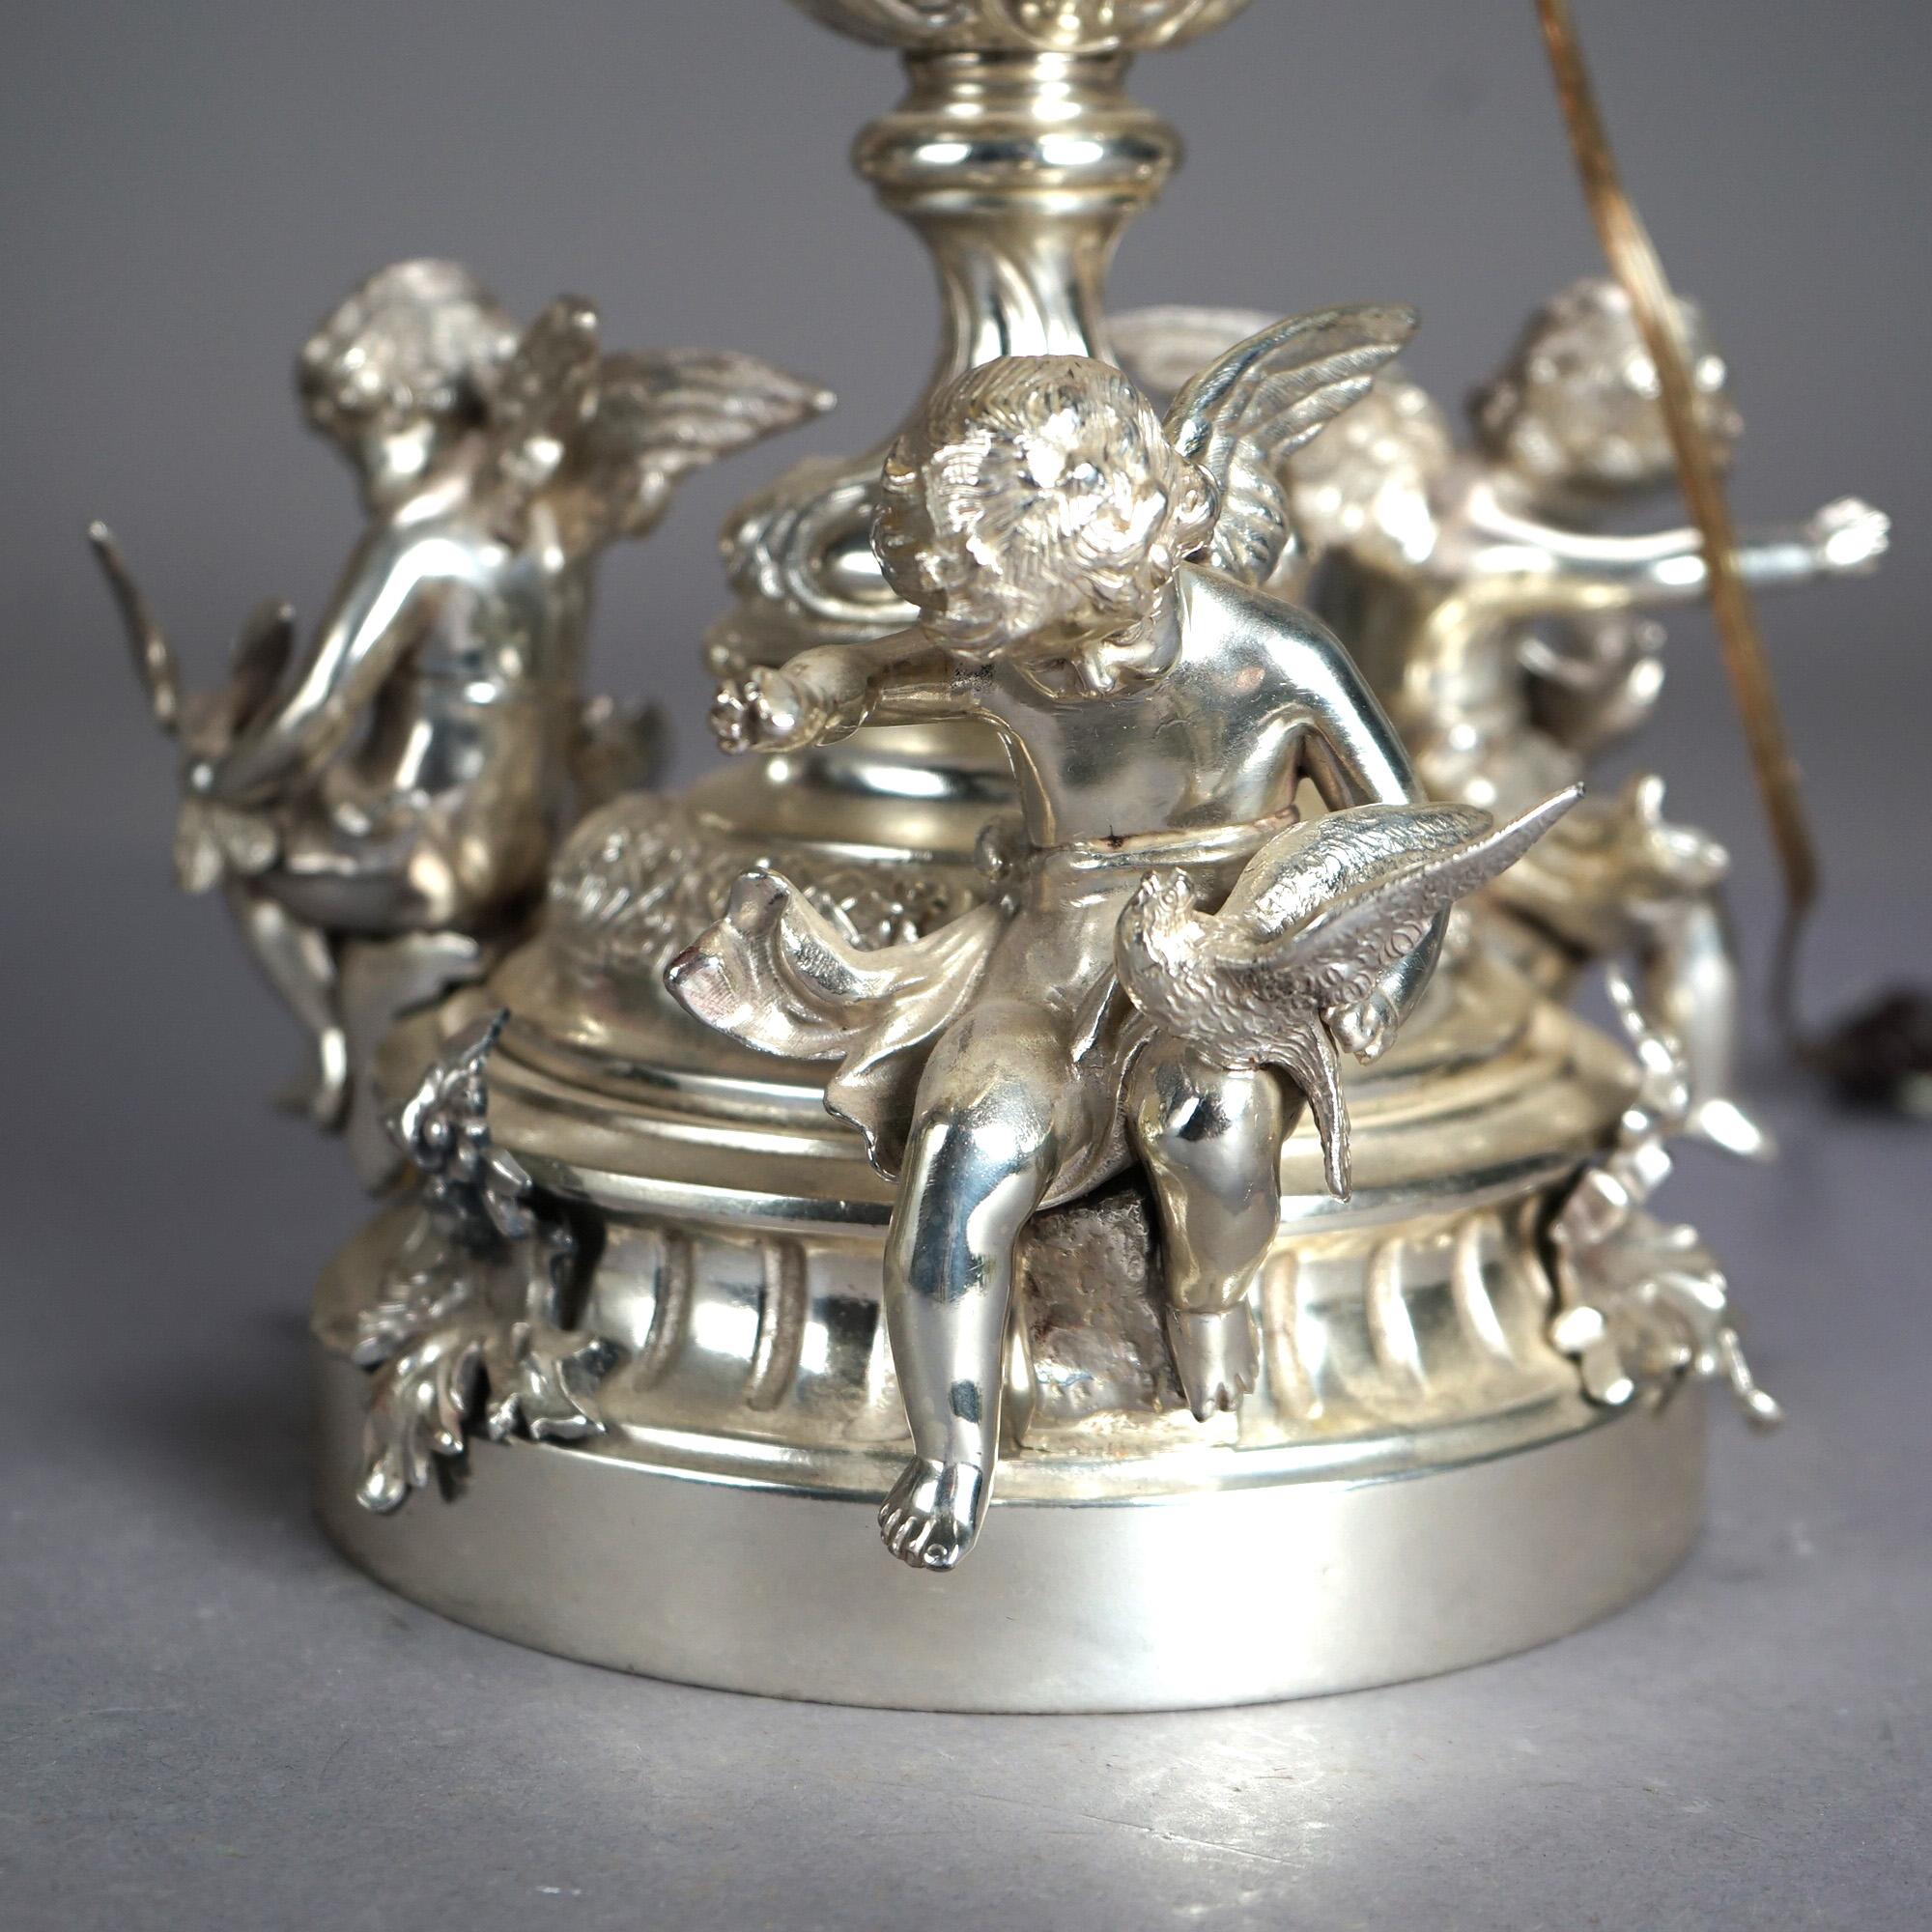 Antique Rococo Figural Silver Plate Parlor Lamp with Winged Cherubs & Angels, Etched Glass Shade, Circa 1890

Measures - 37